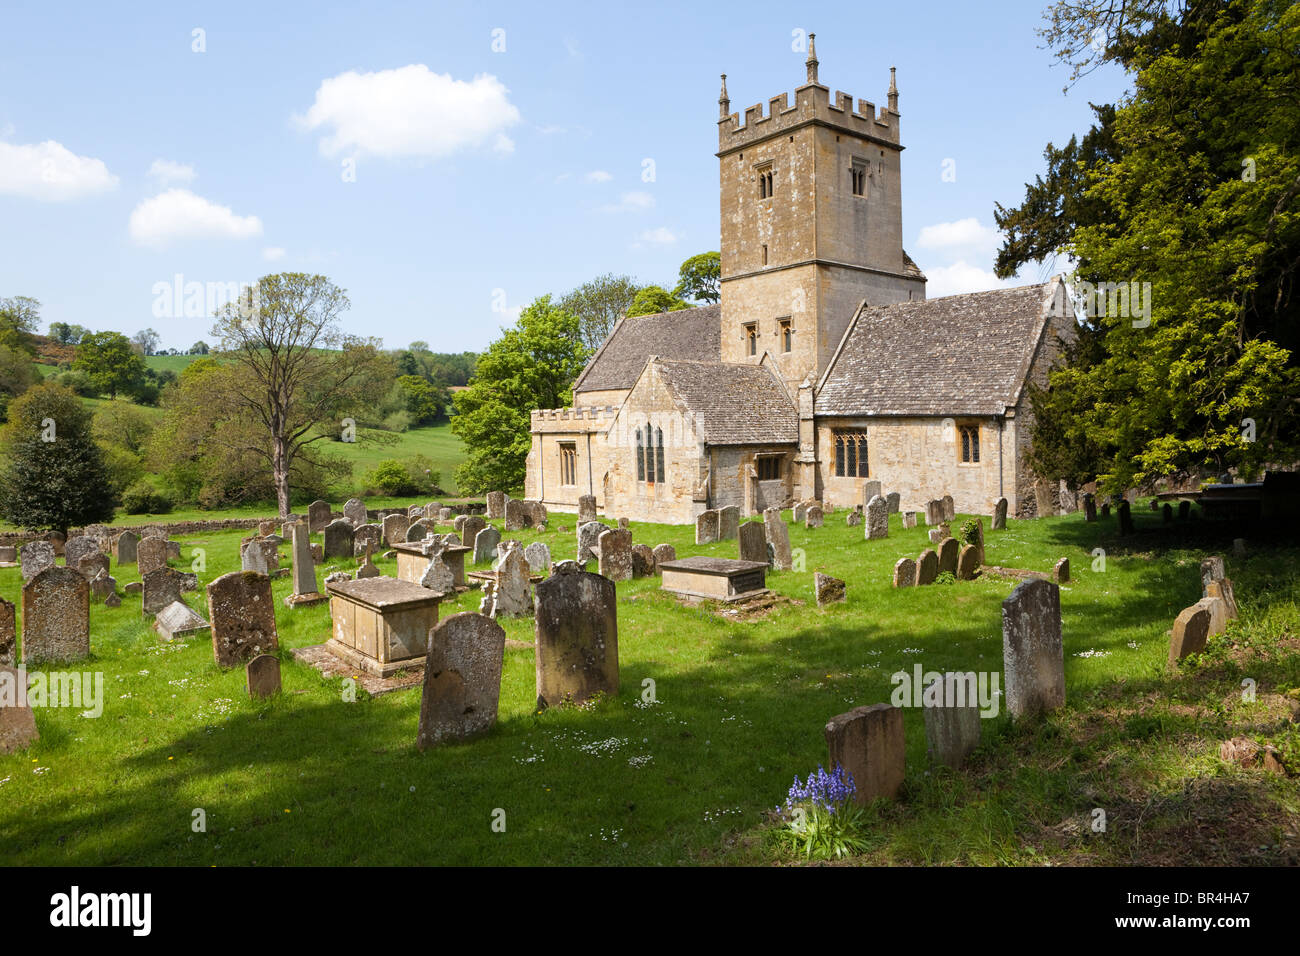 Springtime at St Eadburgha church in the Cotswold village of Broadway, Worcestershire UK Stock Photo